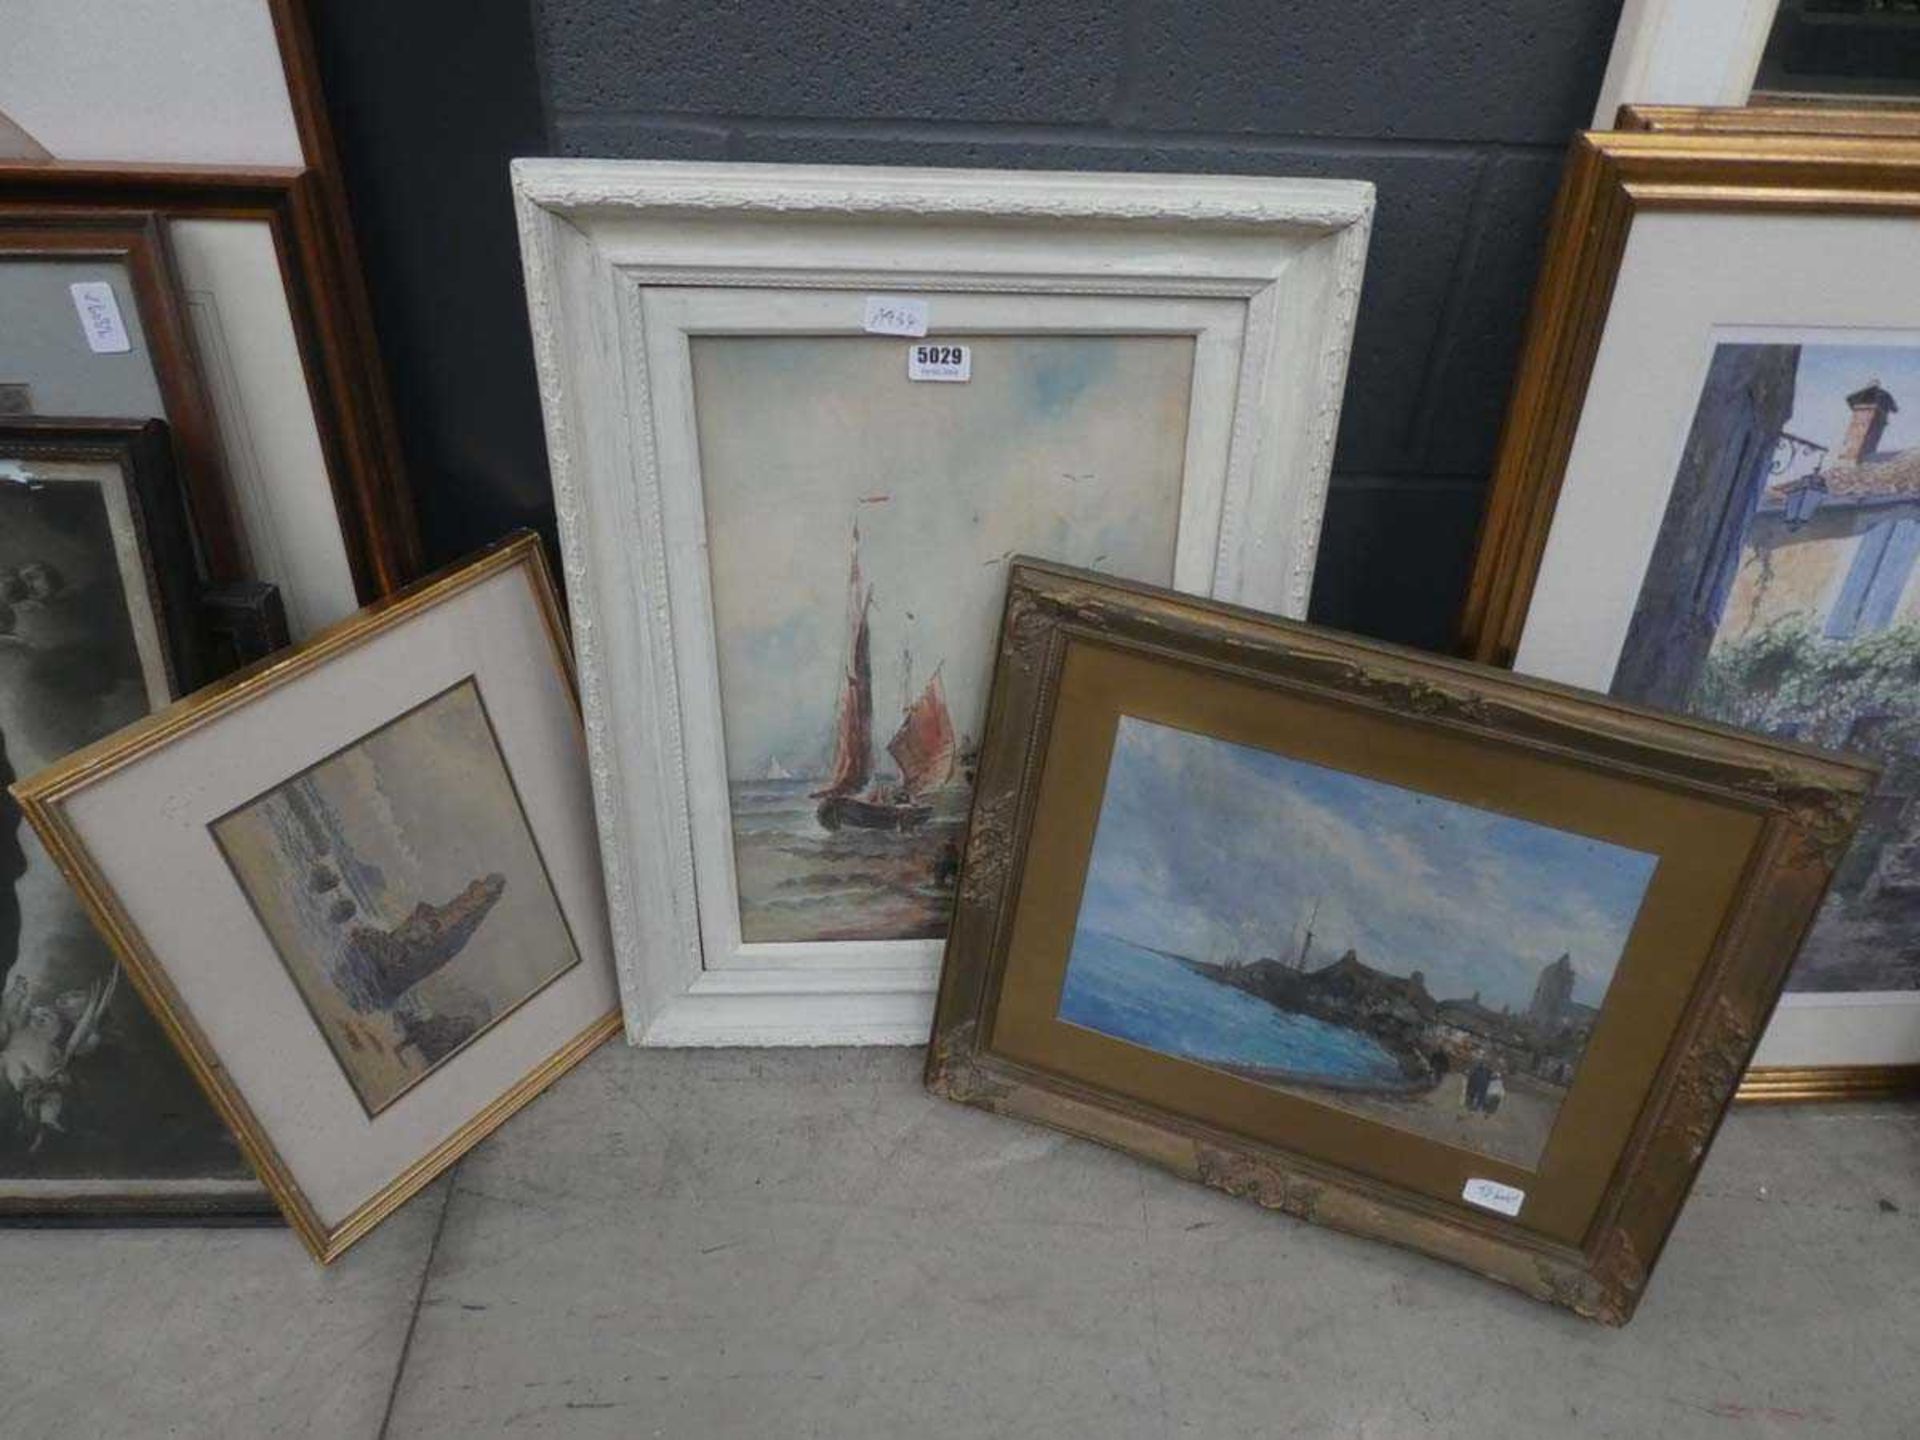 3 paintings including a windmill scene and 2 coastal scenes